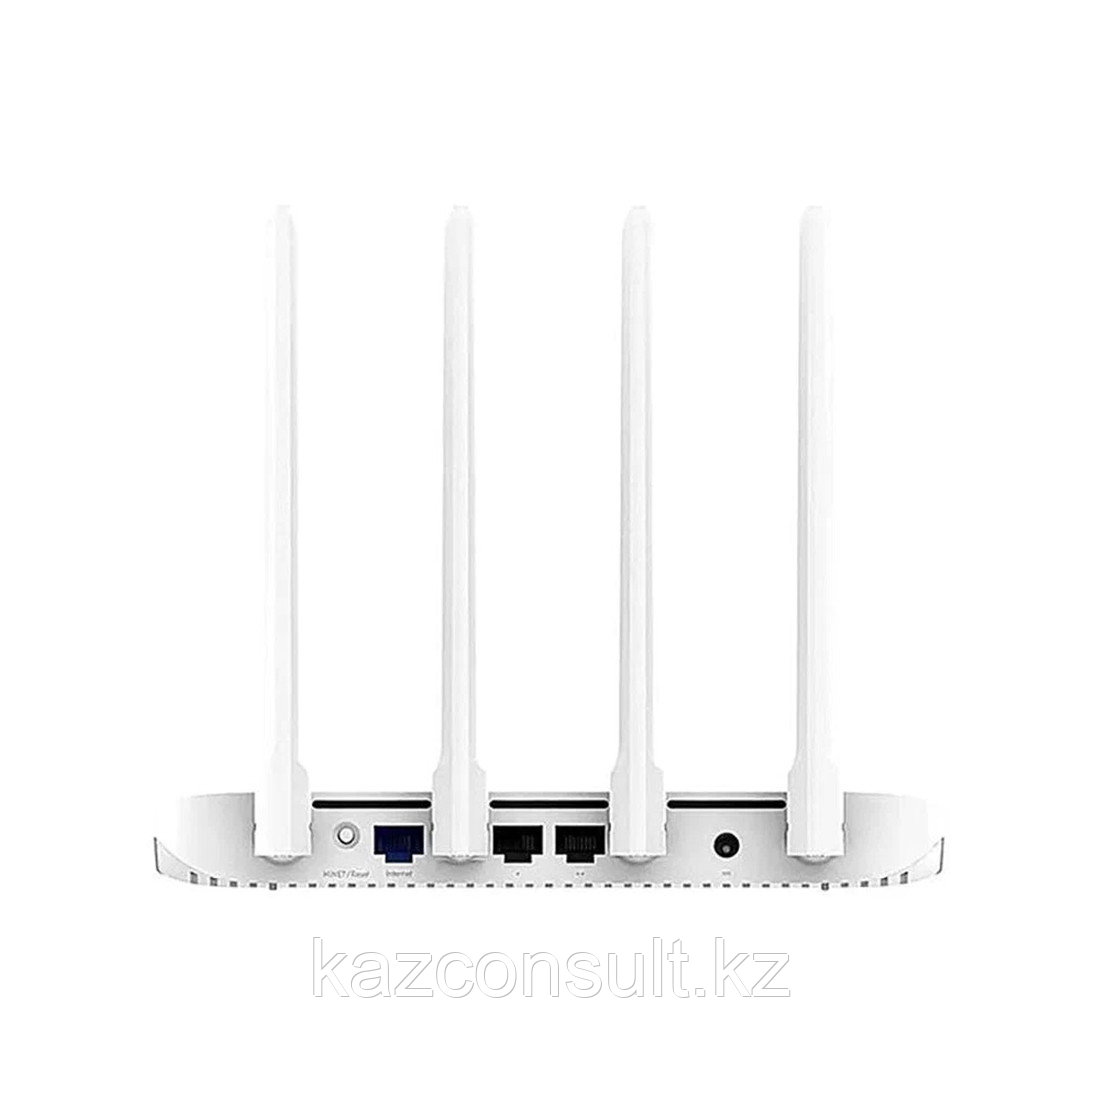 Маршрутизатор Xiaomi Router AC1200 - фото 3 - id-p107603078